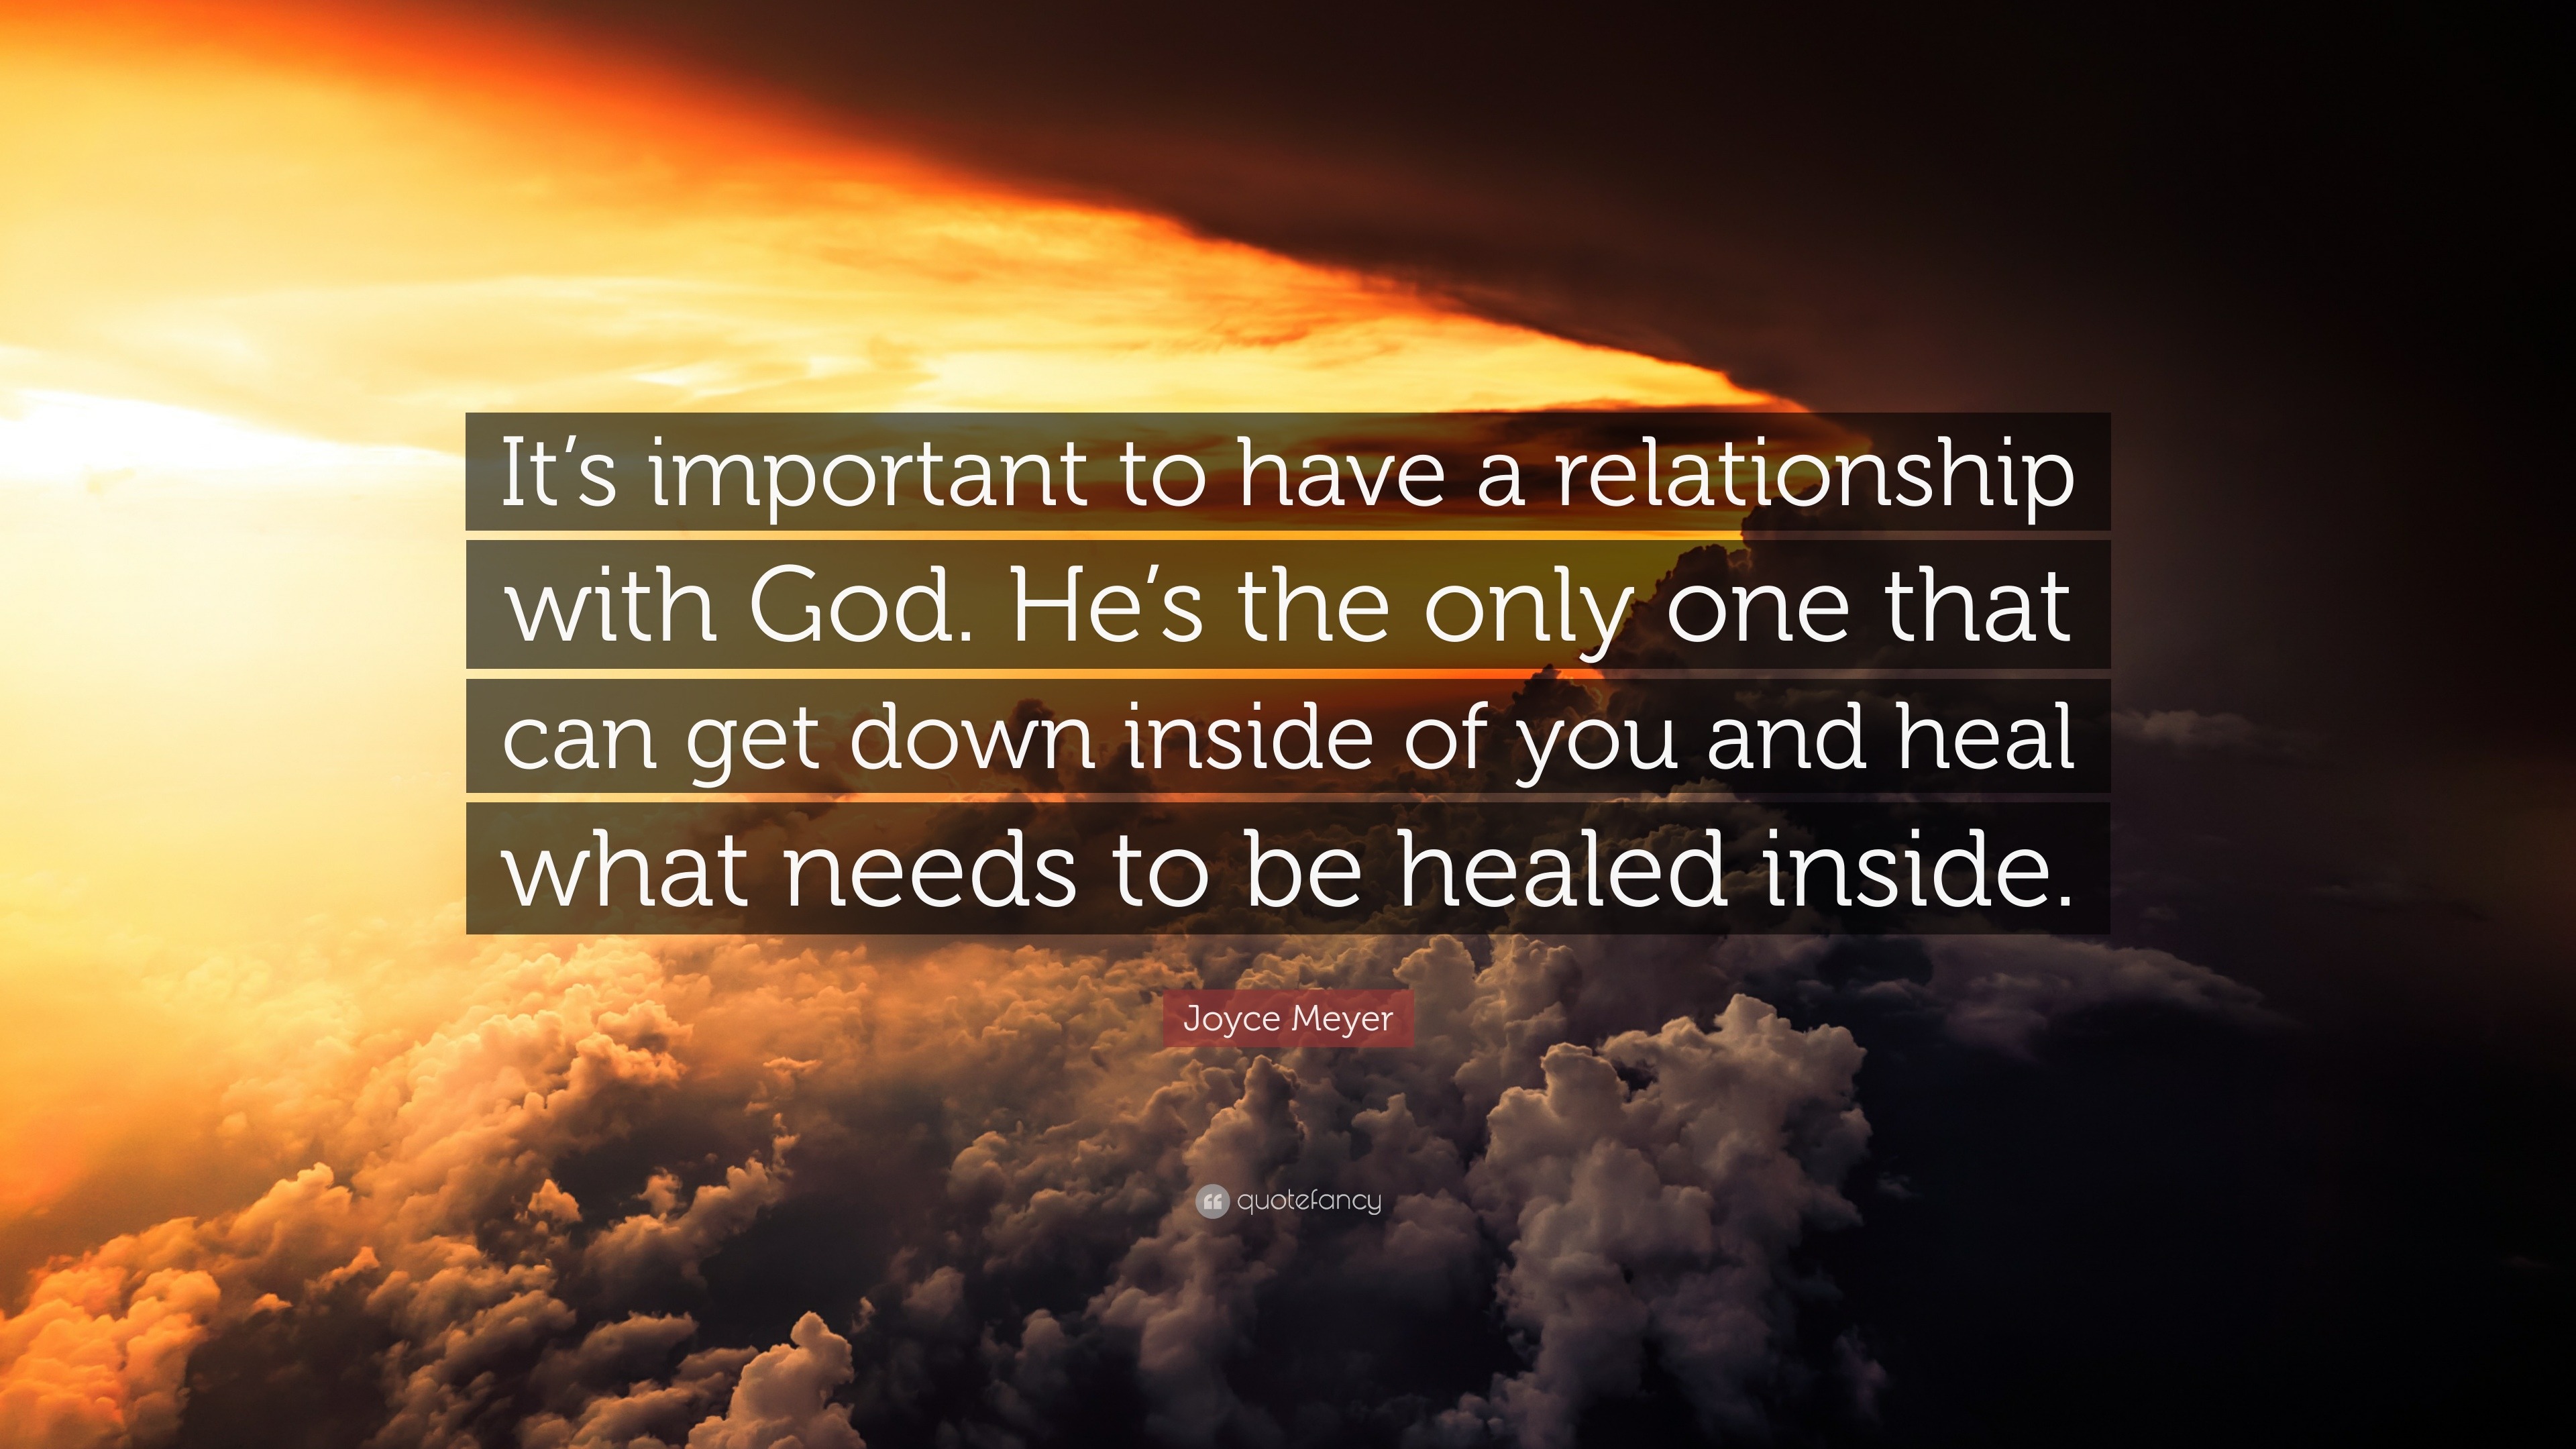 Joyce Meyer Quote “It’s important to have a relationship